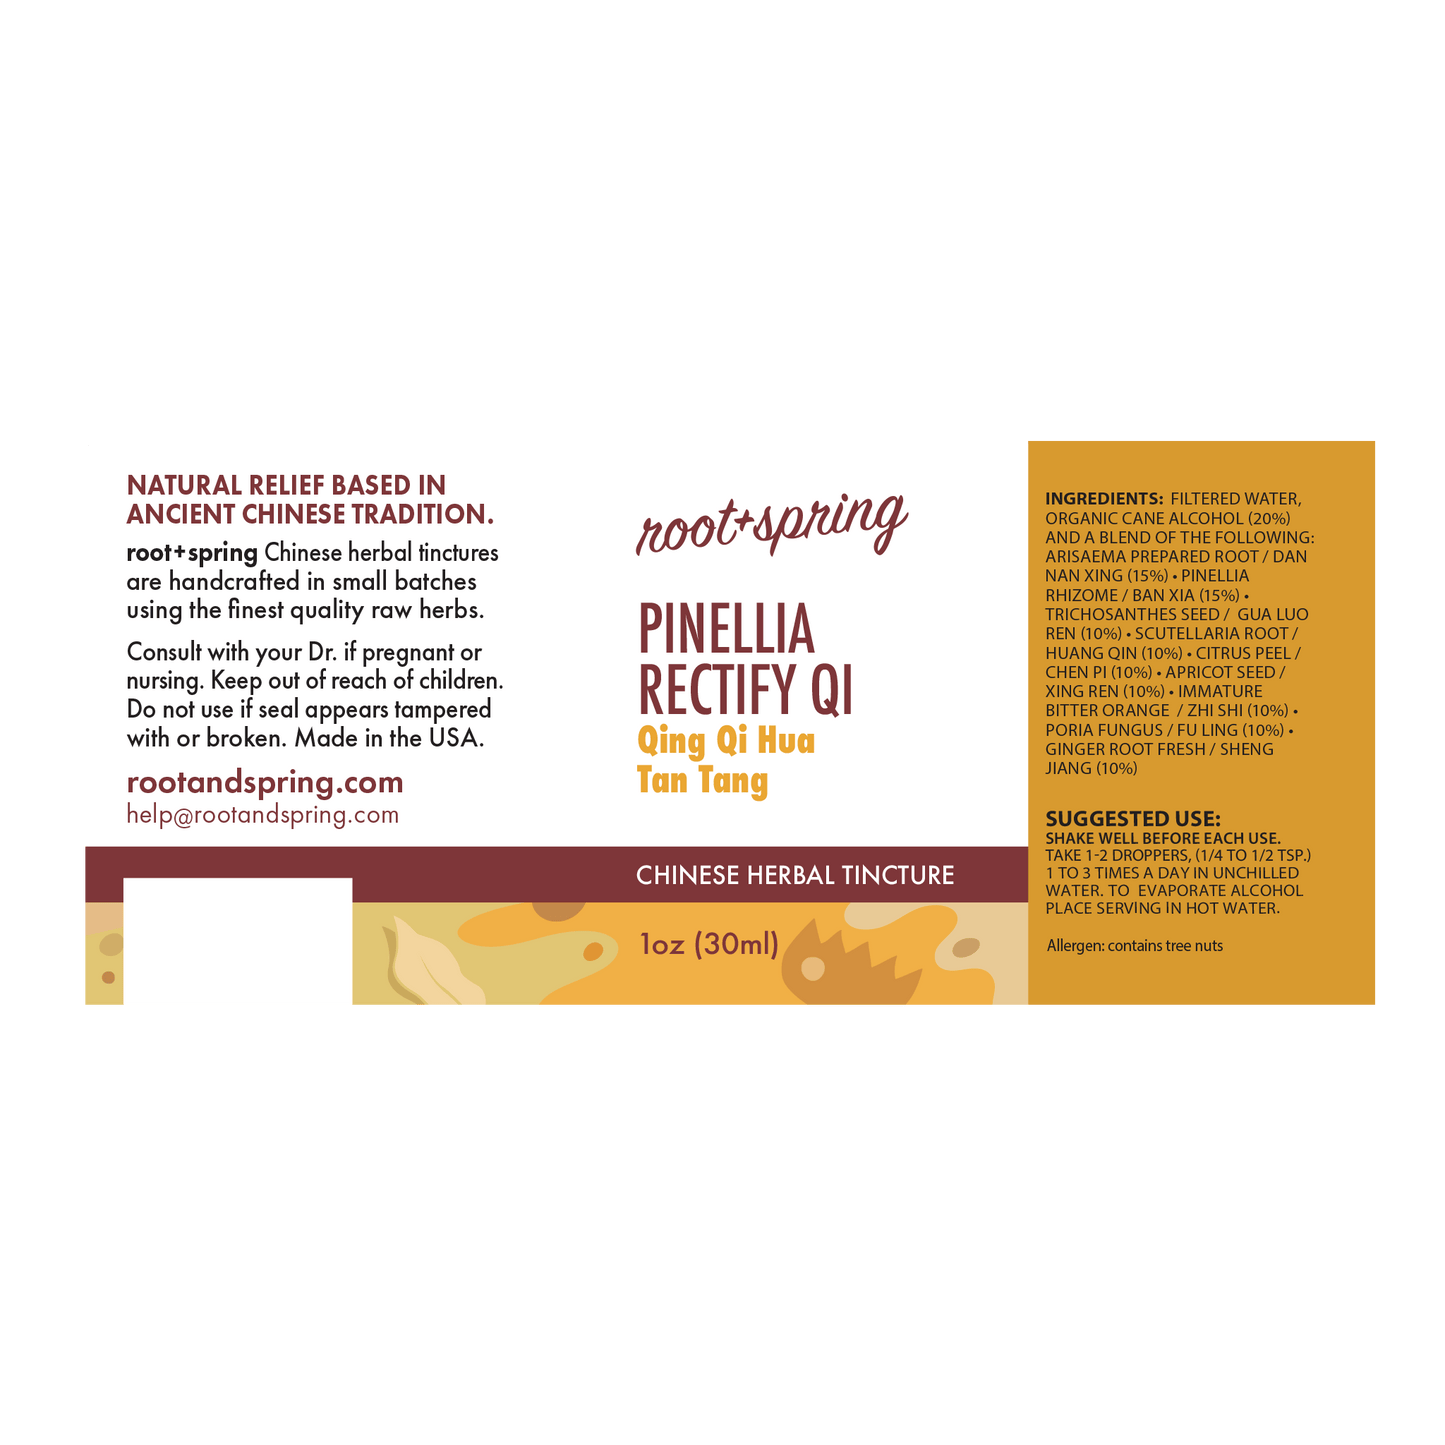 Label for Pinellia Rectify Qi (Qing Qi Hua Tan Tang) - Herbal Tincture by root + spring